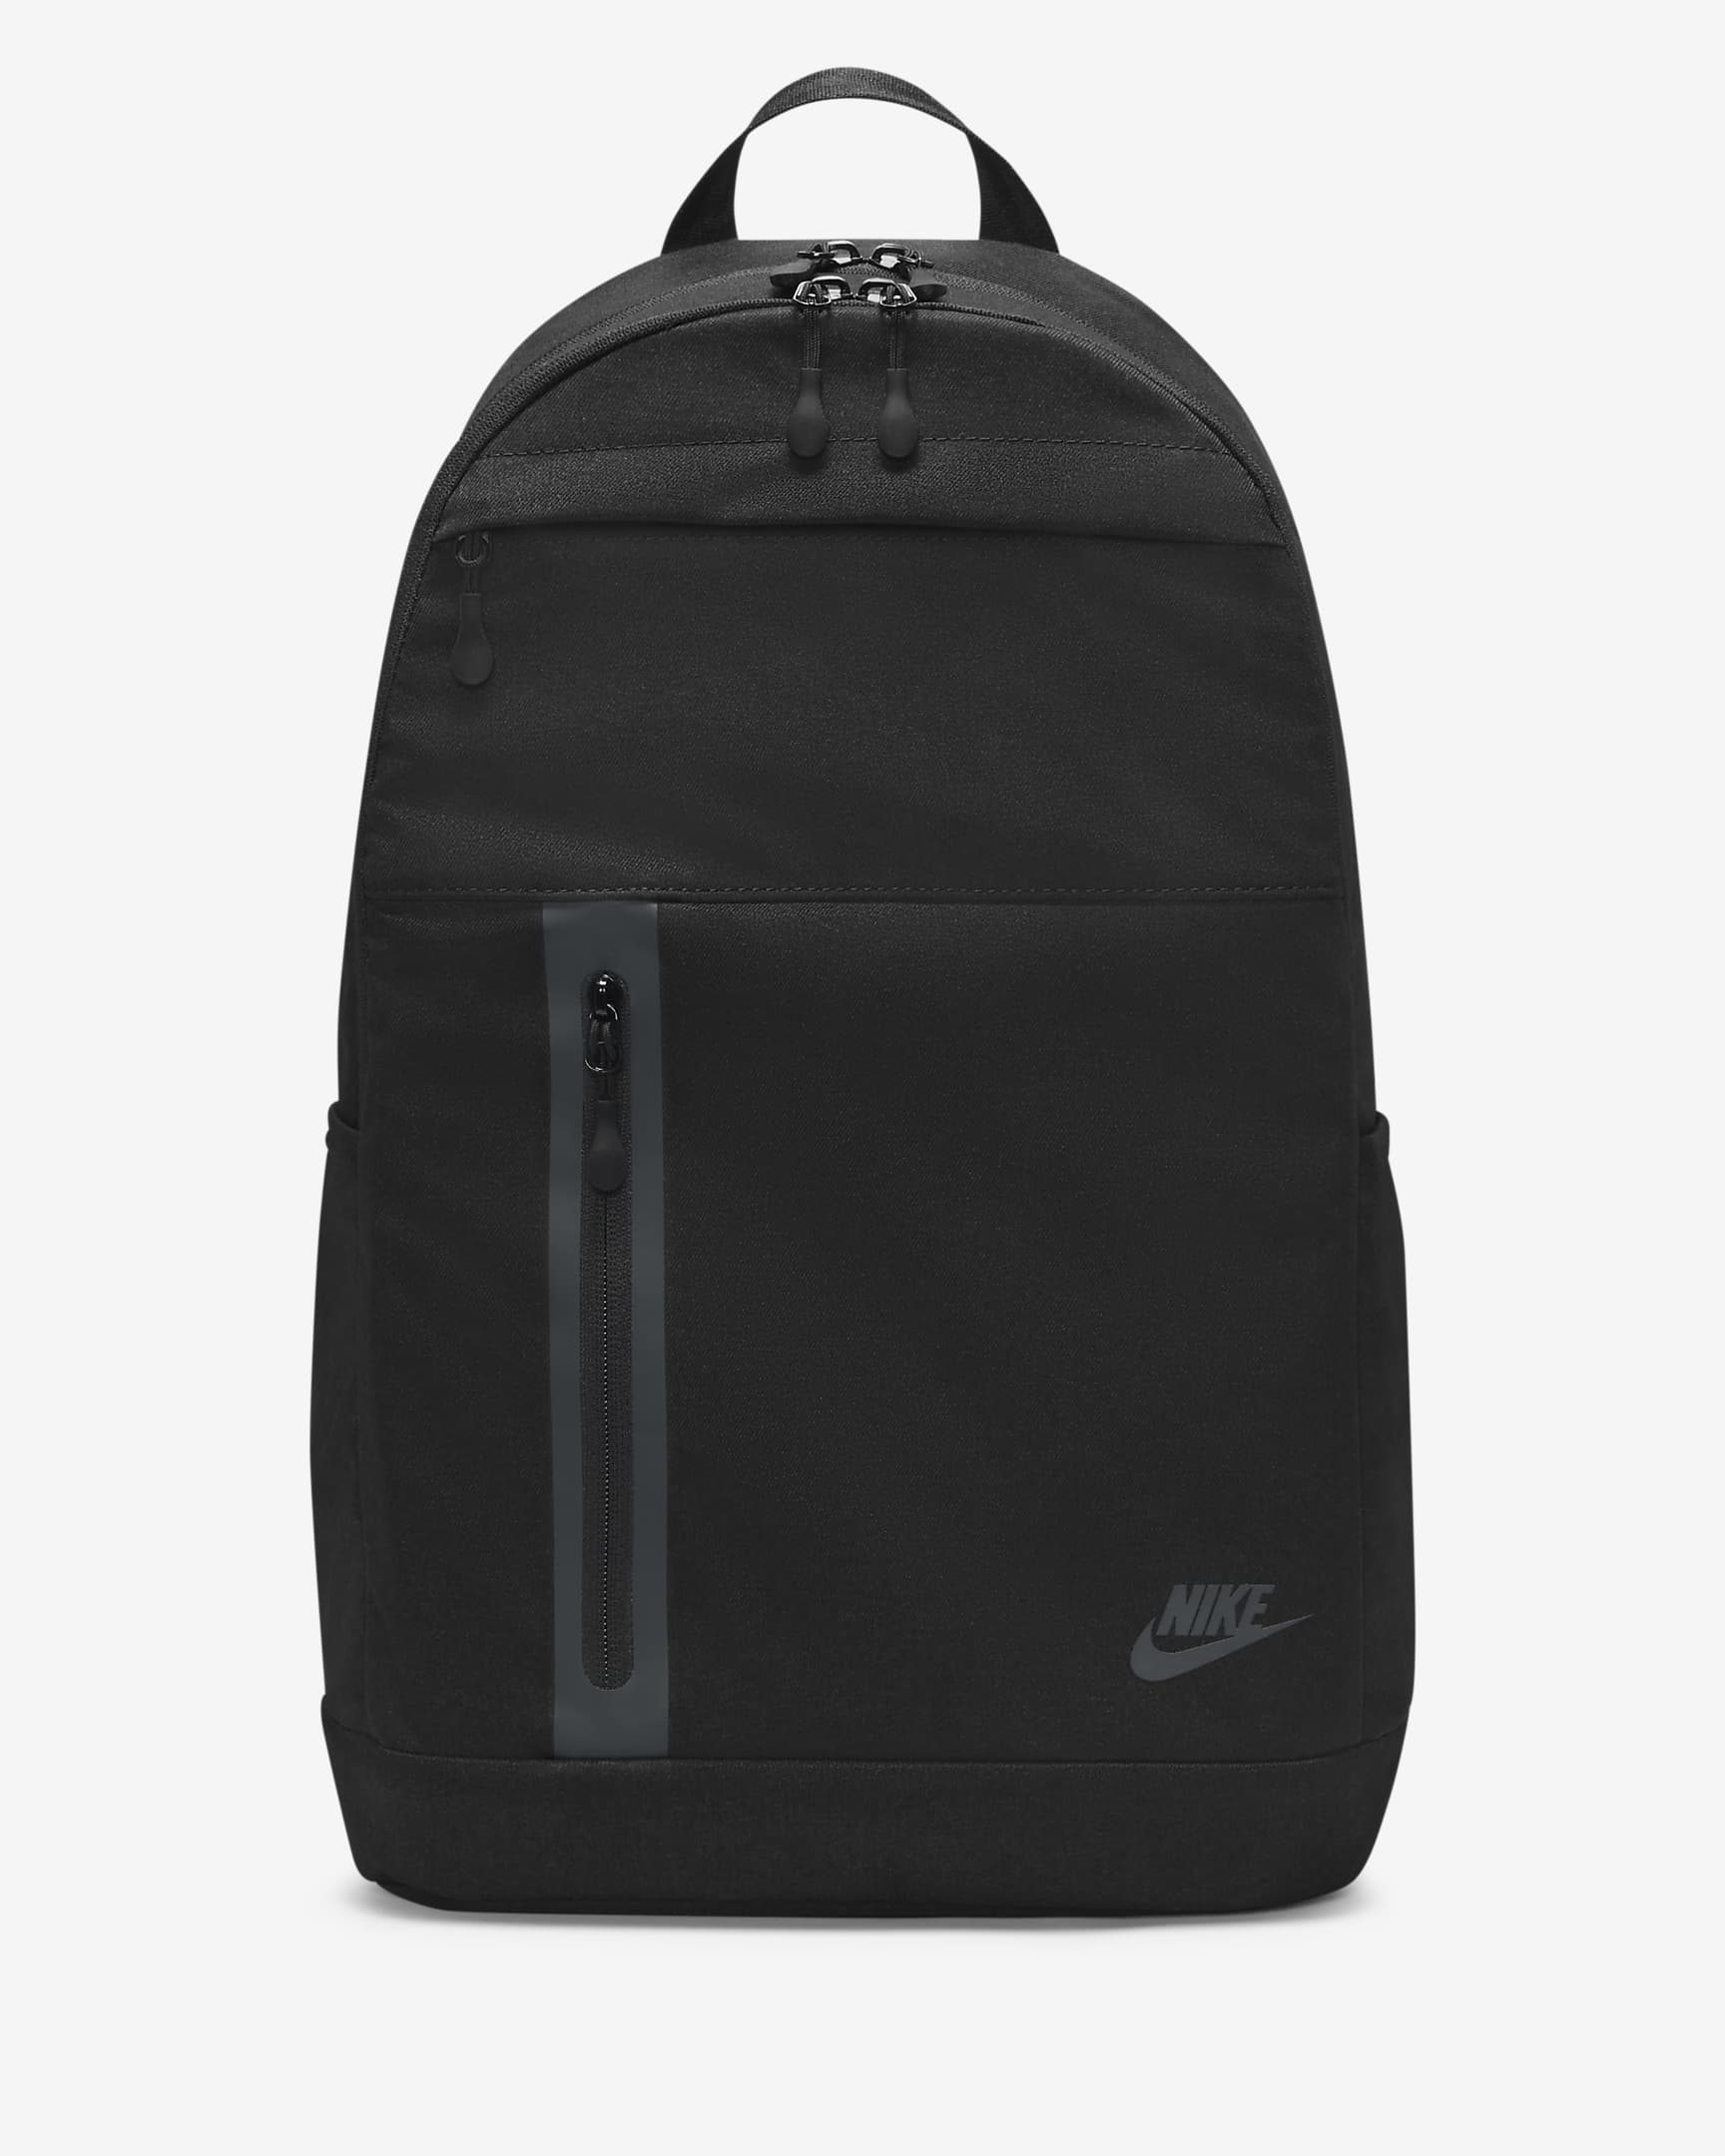 https://static.nike.com/a/images/t_PDP_1728_v1/f_auto,q_auto:eco/b1baacf6-2a4c-4e19-bc6a-94375f70e6b8/backpack-7V0Whb.png